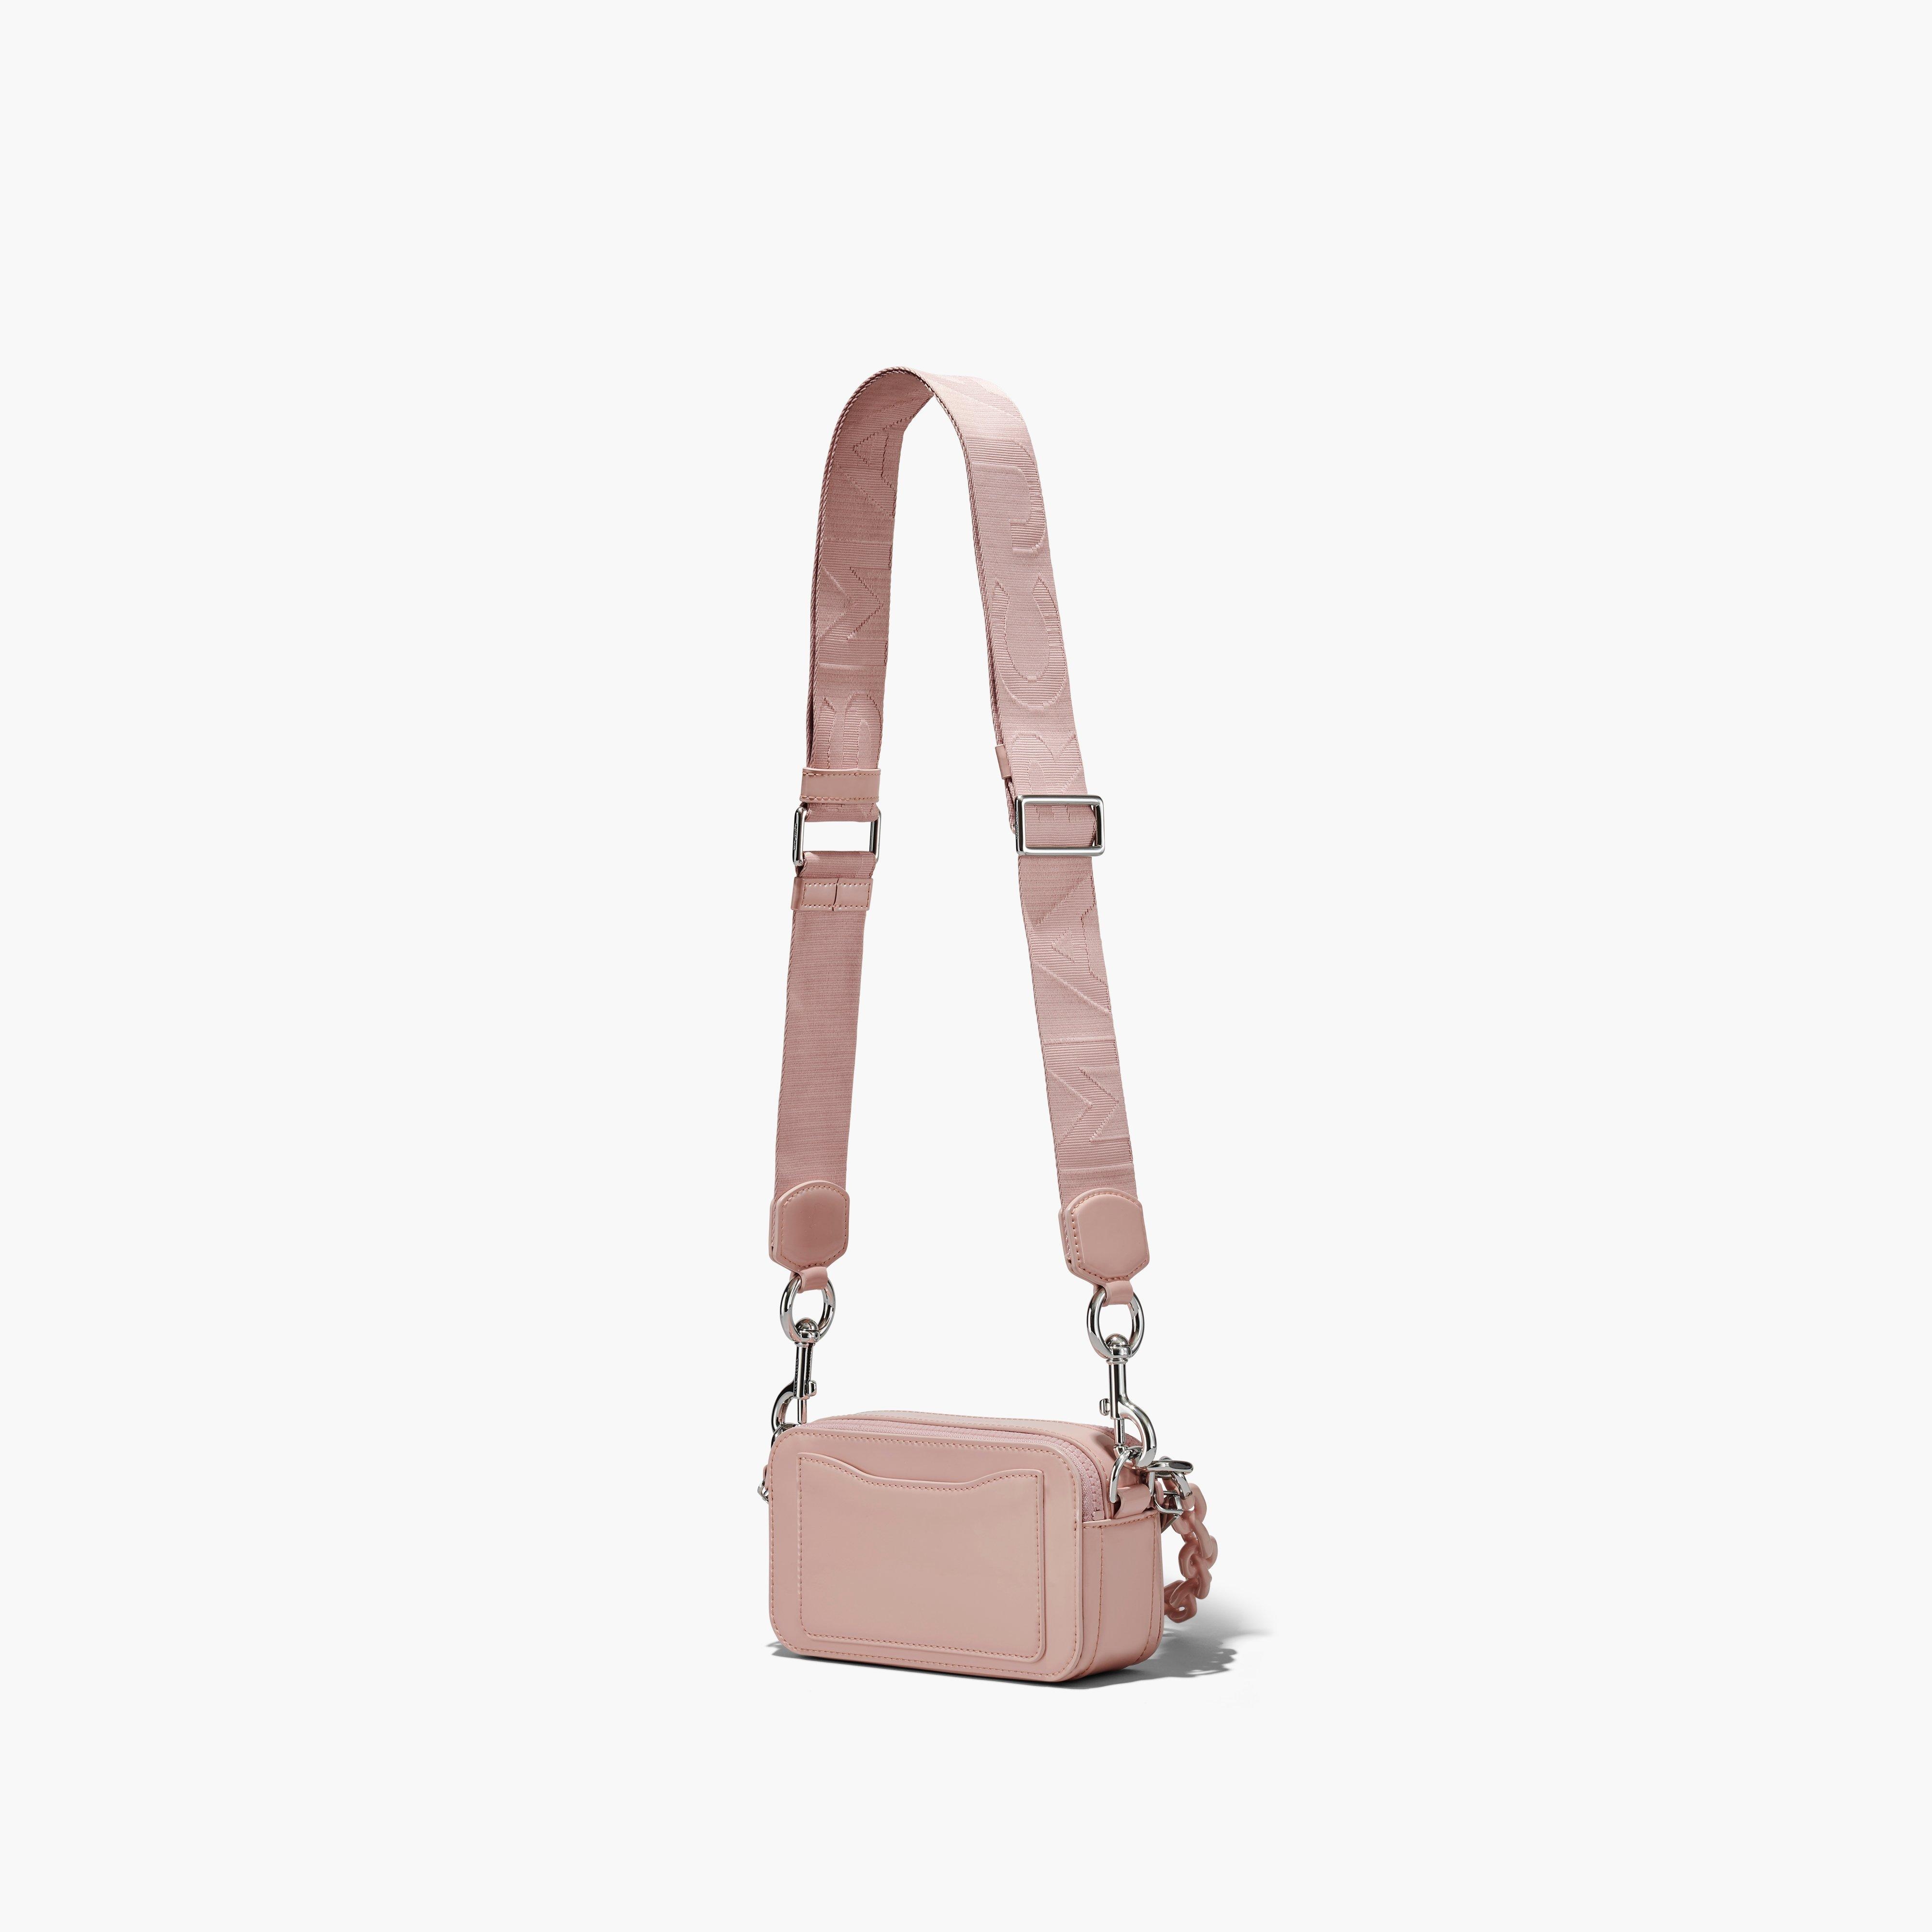 Marc Jacobs The Snapshor pink patent leather bag